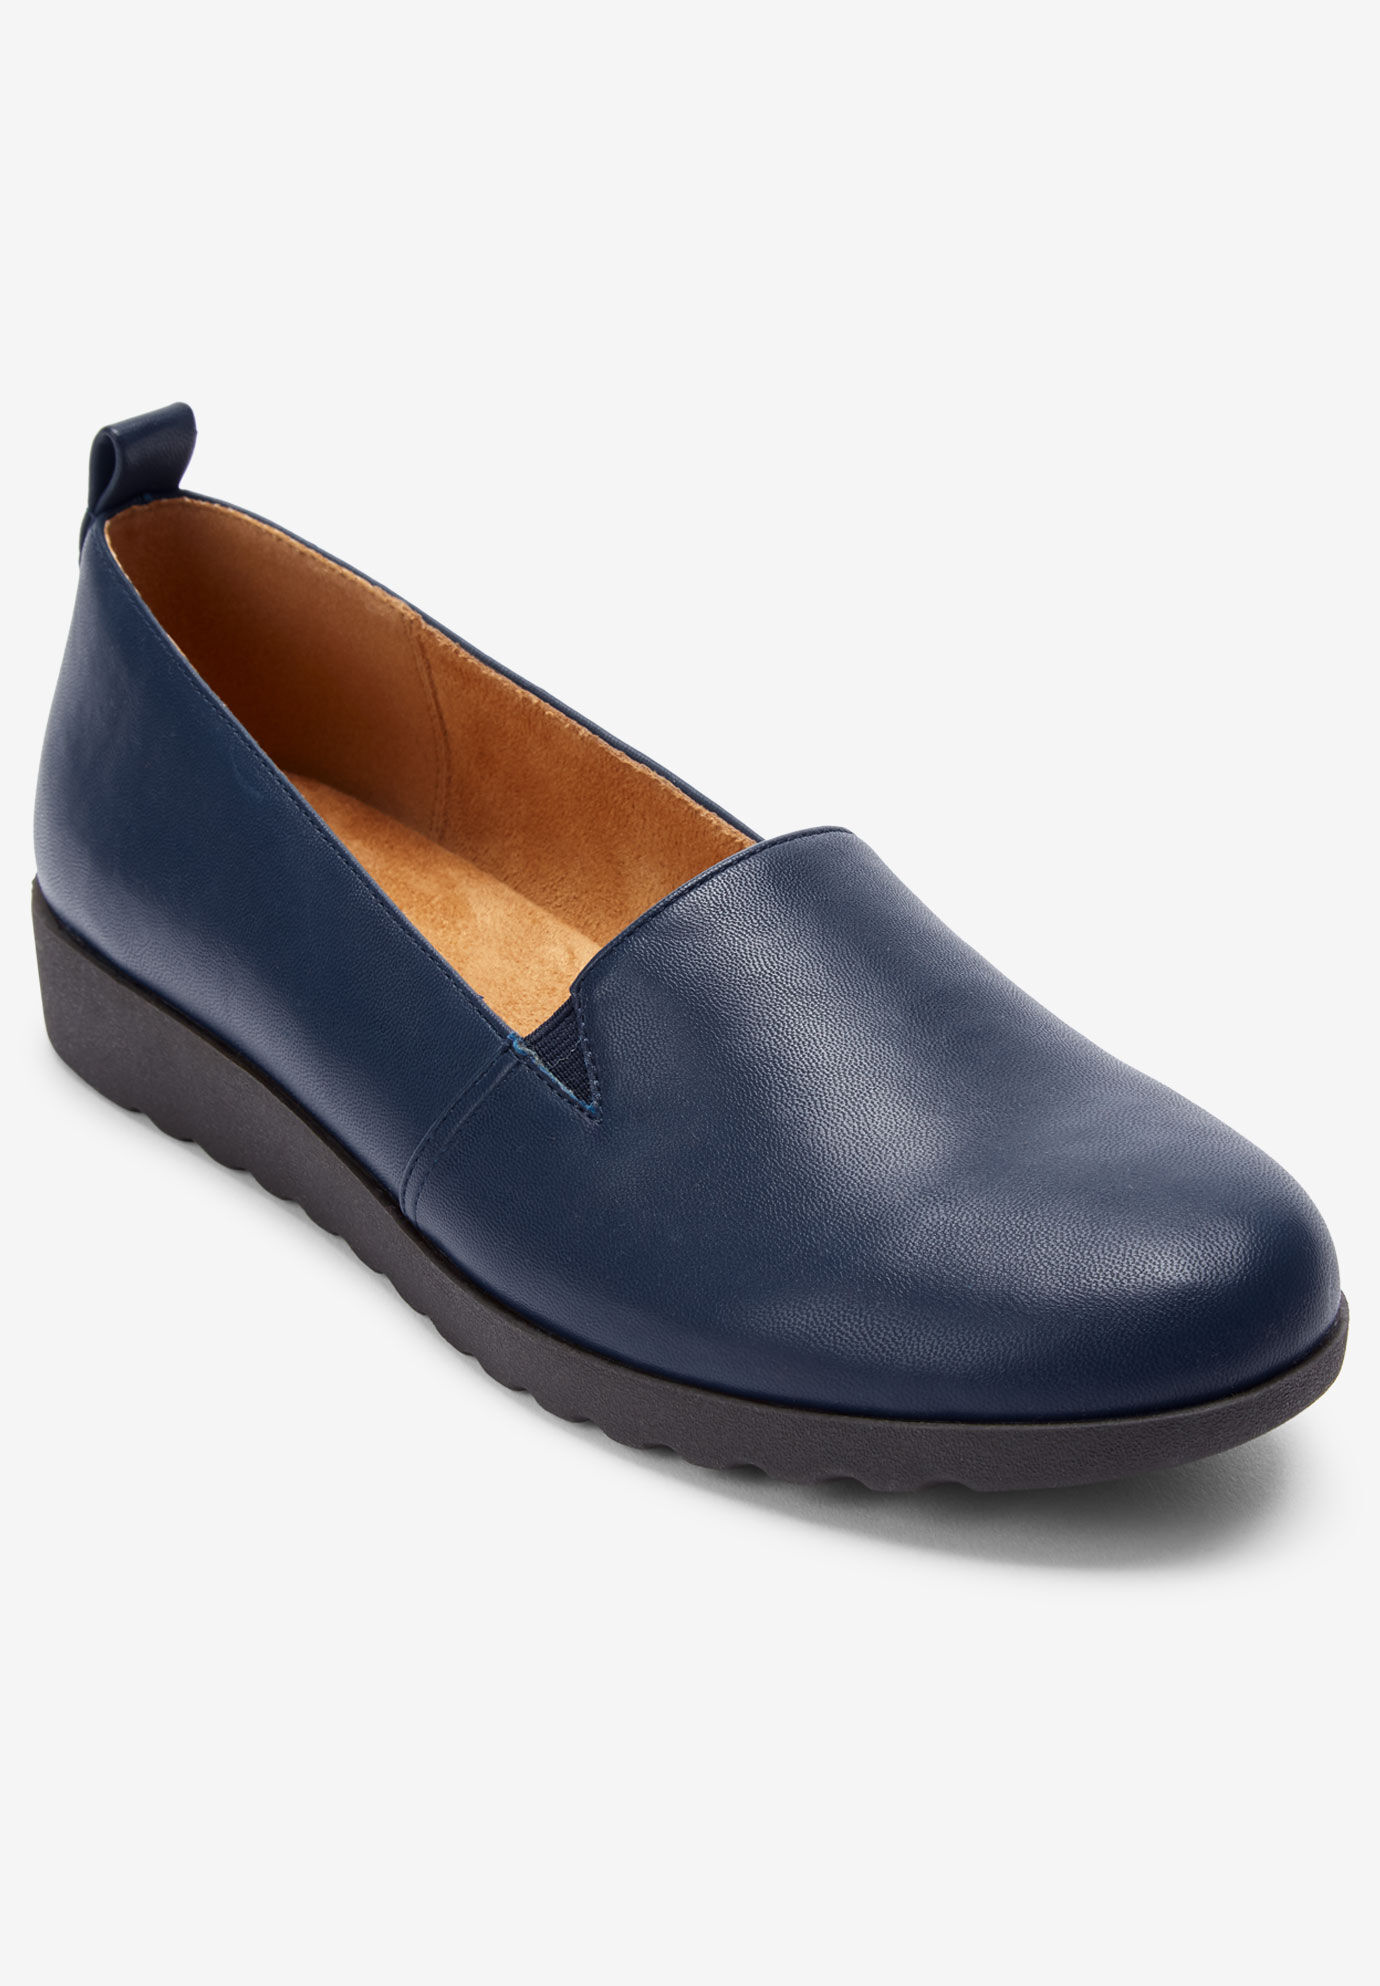 Best Sellers - Wide Width Shoes | Shoes For All